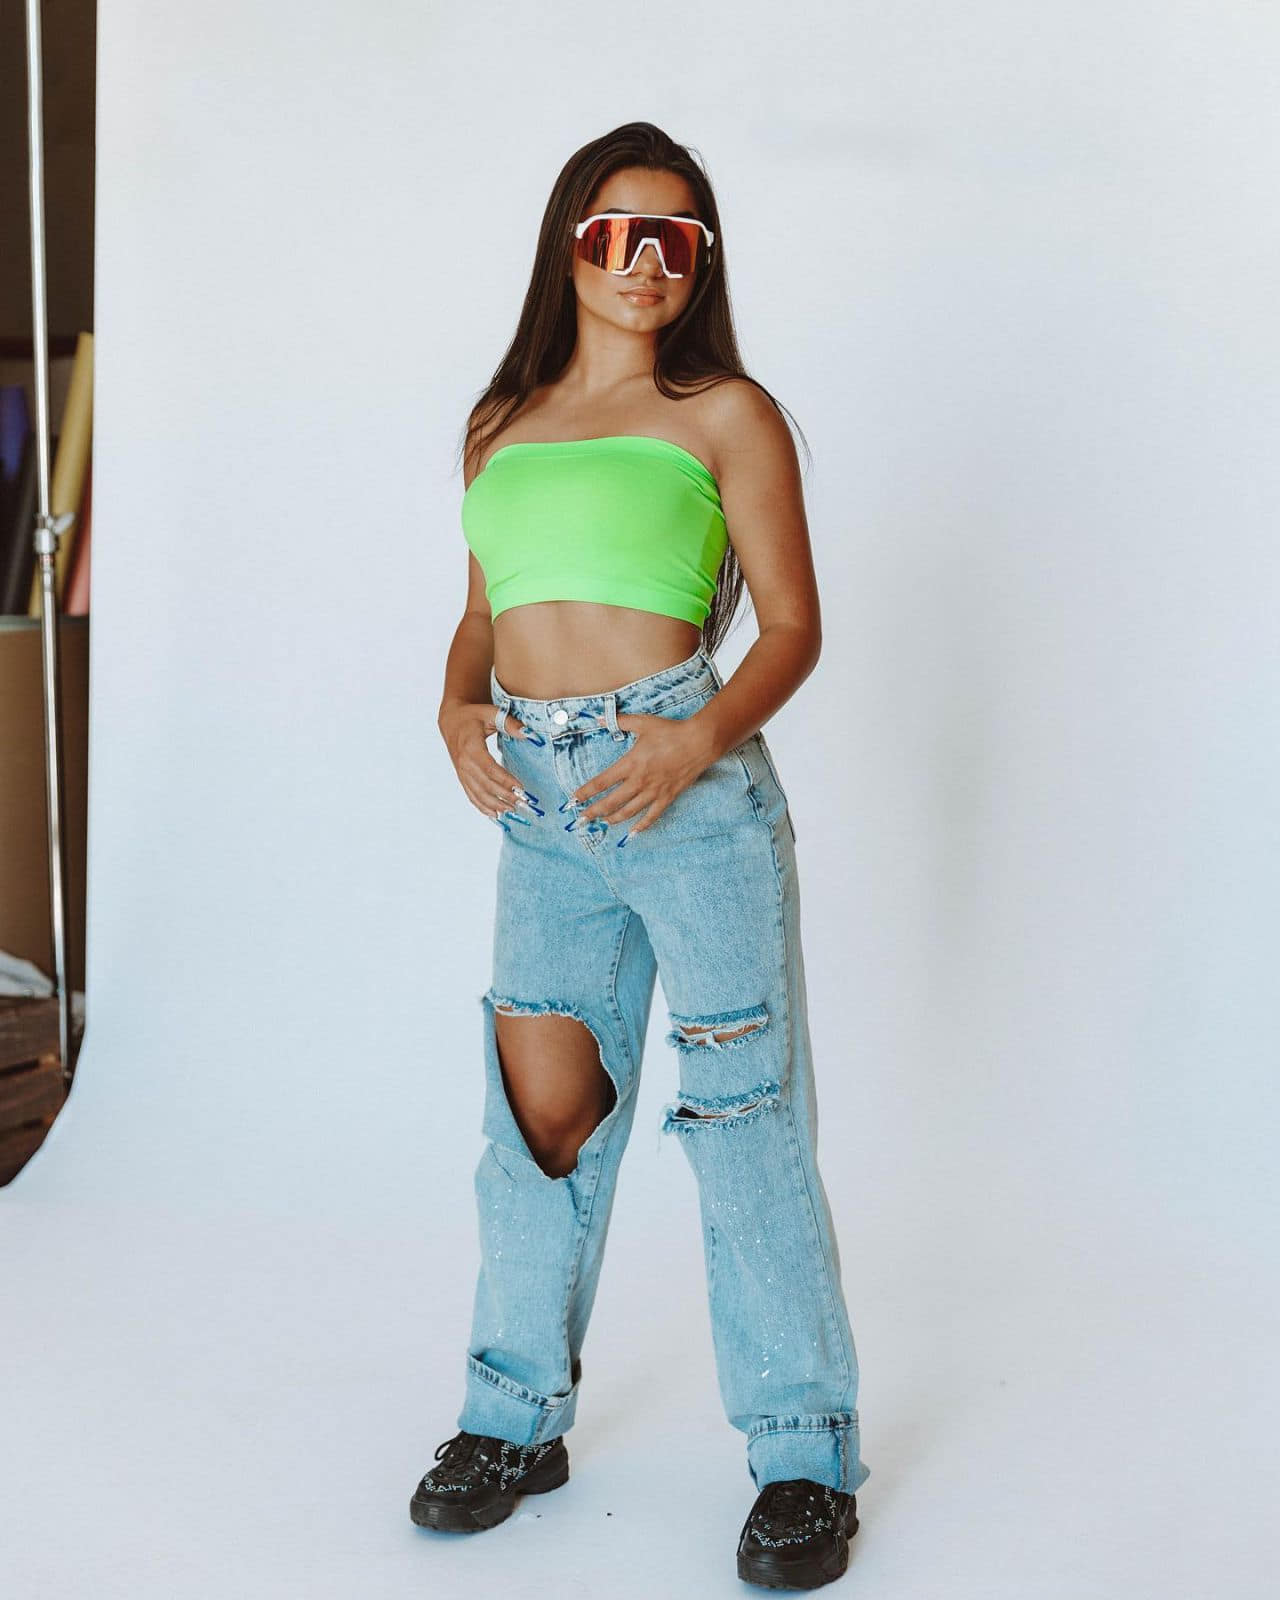 Tati McQuay Posing in Green Strapless Top and Jeans